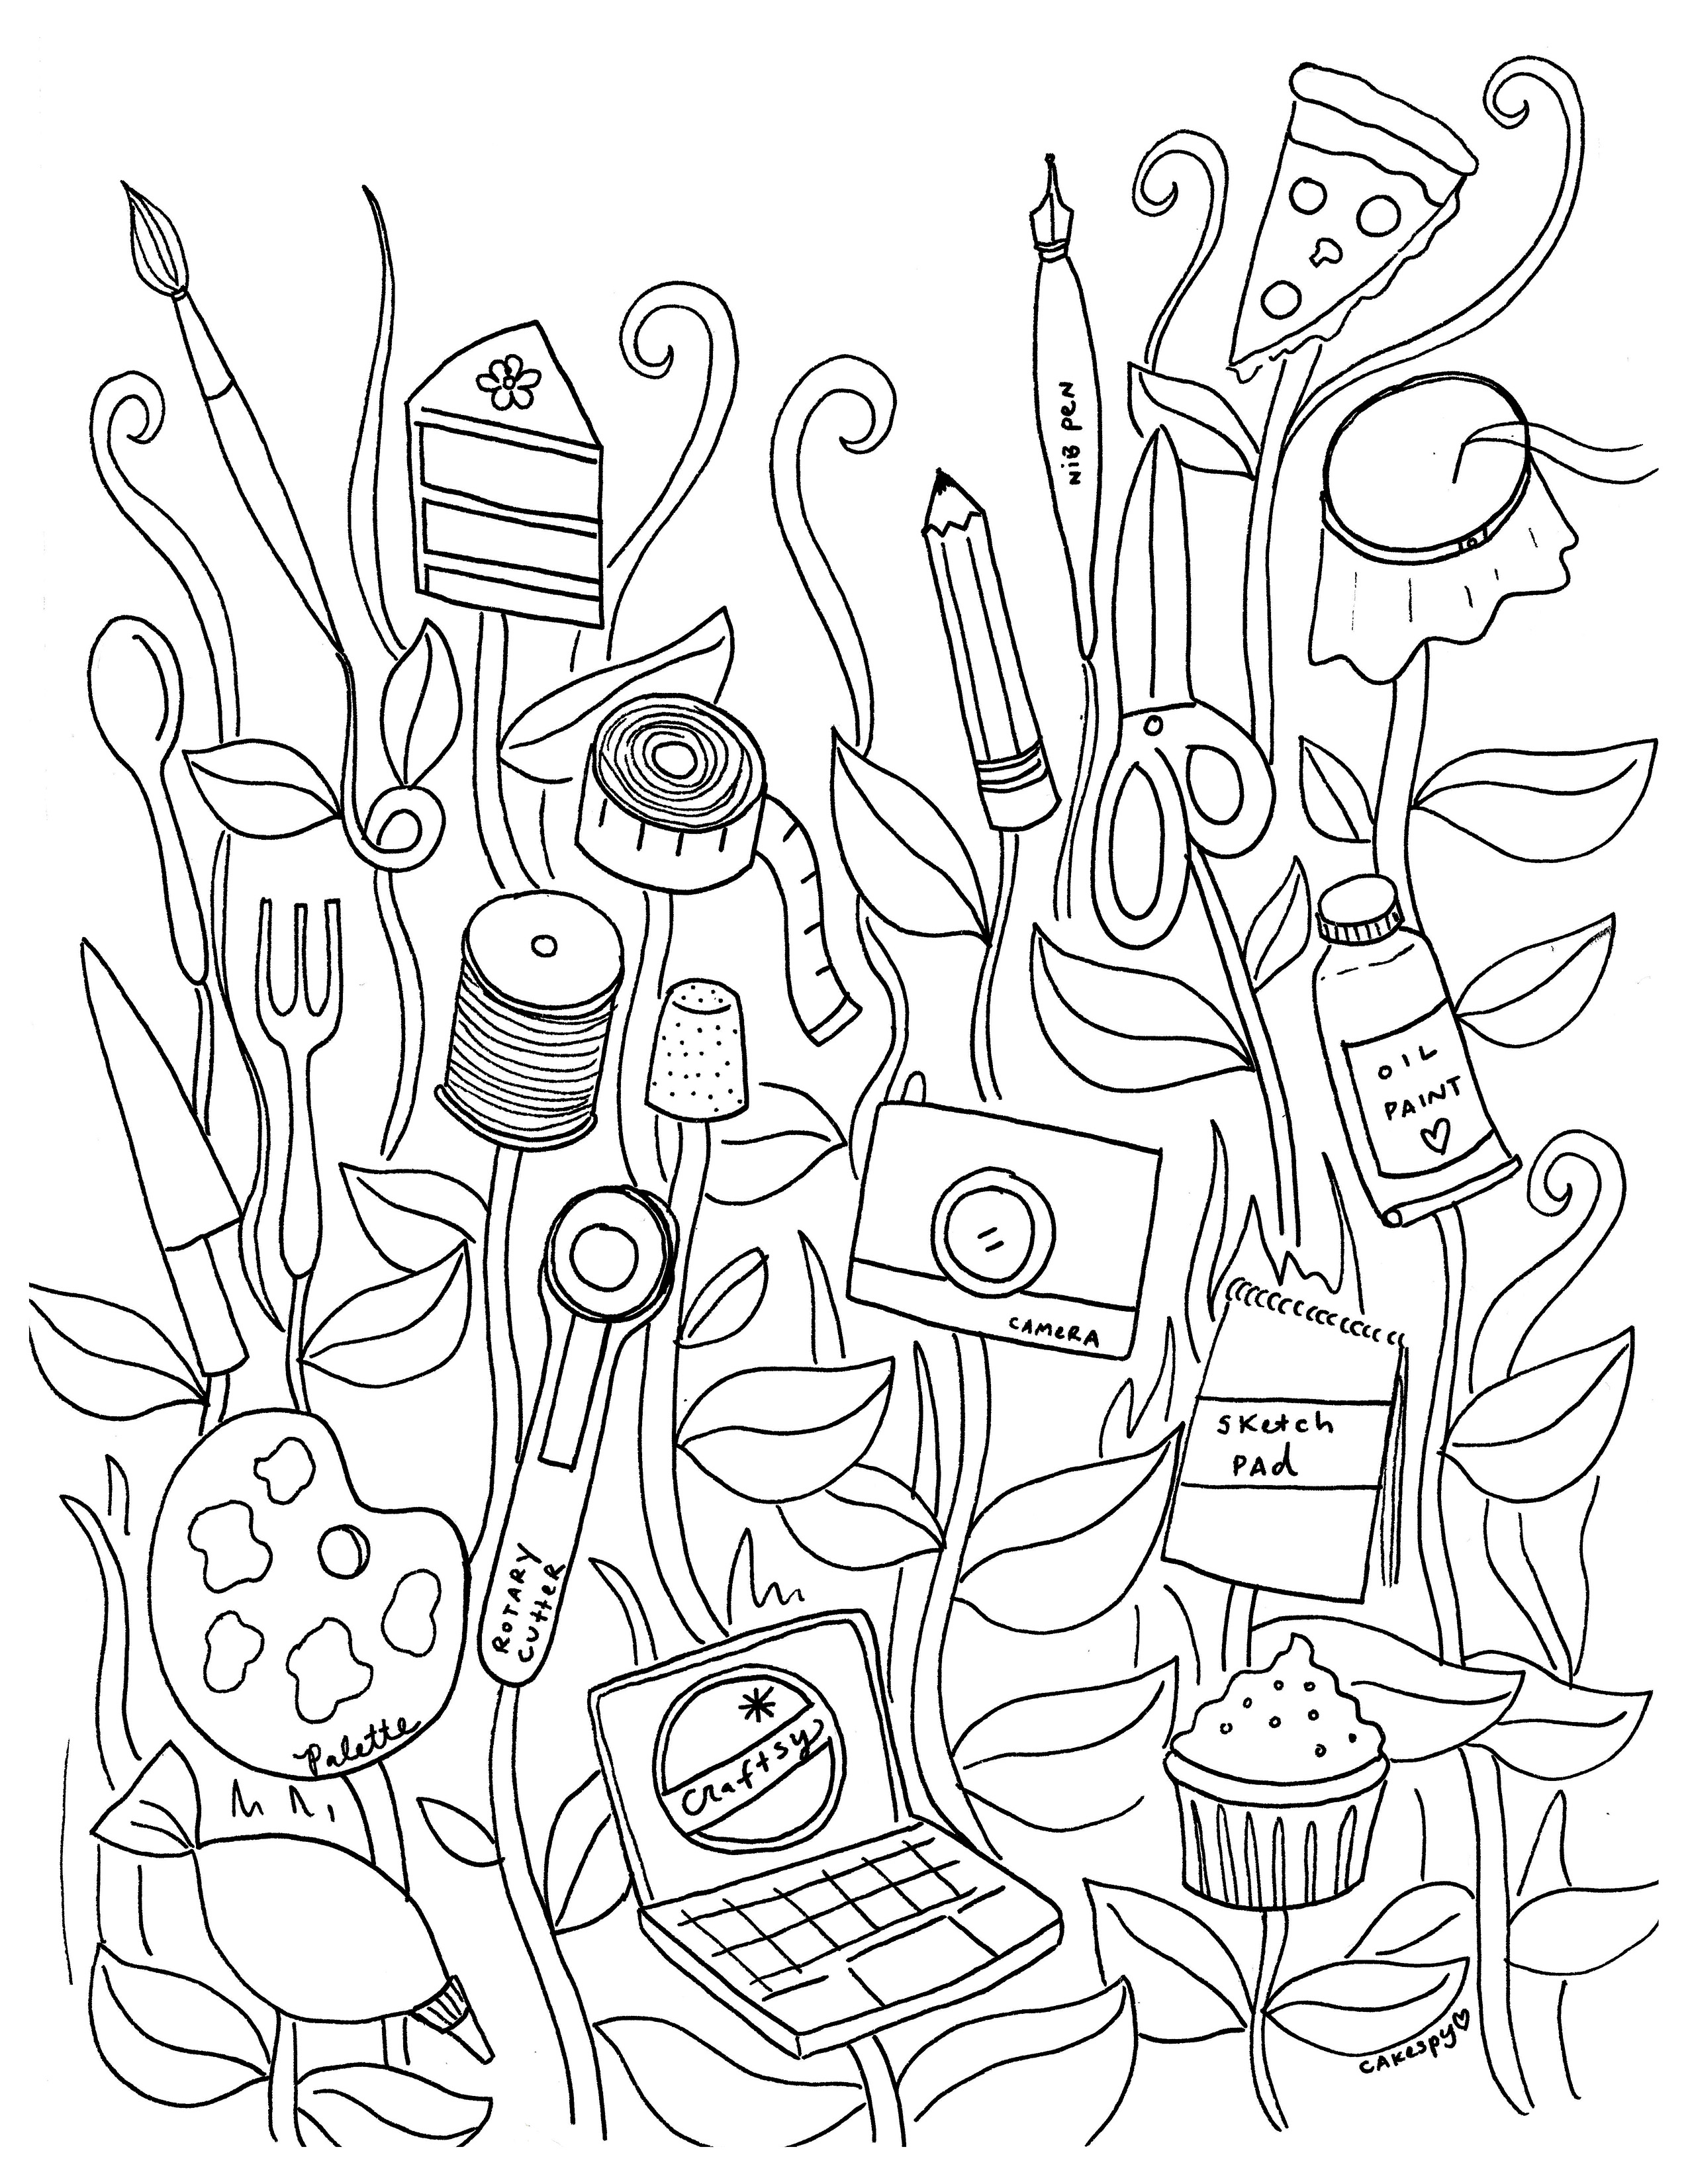 Sewing Coloring Pages at GetColorings.com | Free printable colorings